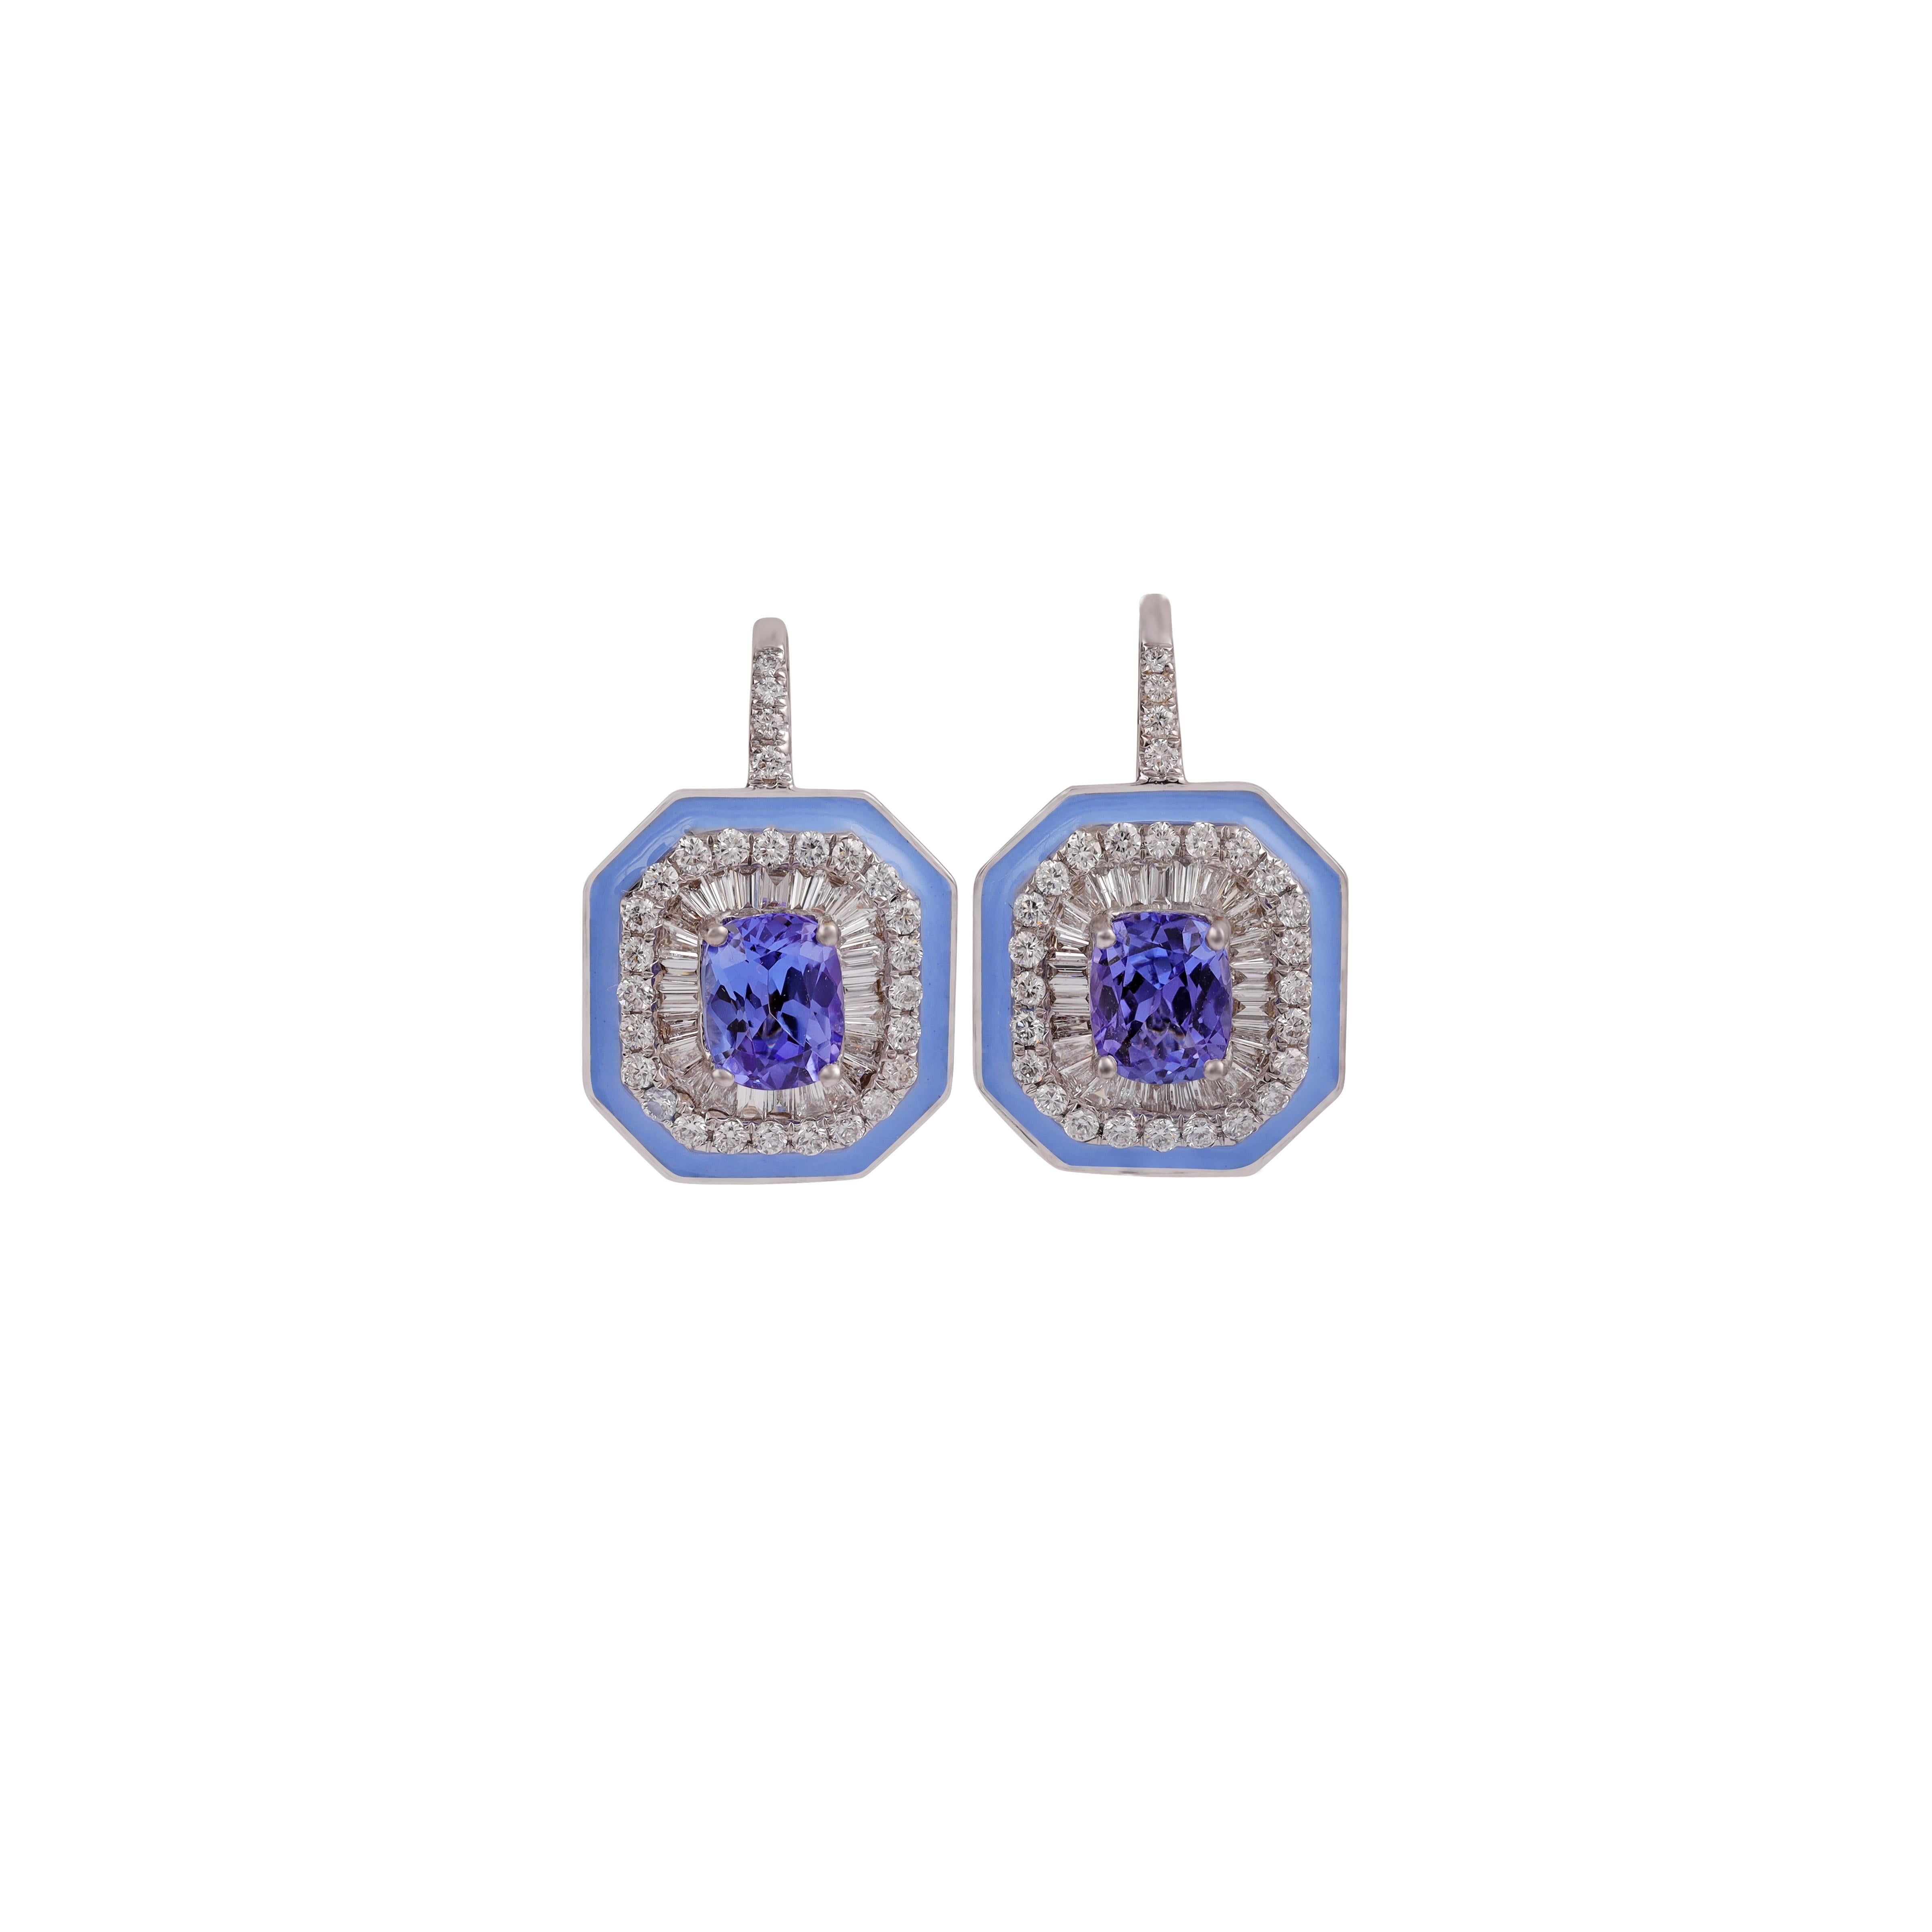 If you are looking for tanzanite earrings, this is the ultimate find, (1.76 carats) of the finest tanzanite color is the focal point. These tanzanite's are sourced near the foothills of Mt. Kilimanjaro in Tanzania. Perfectly matched in color, size,